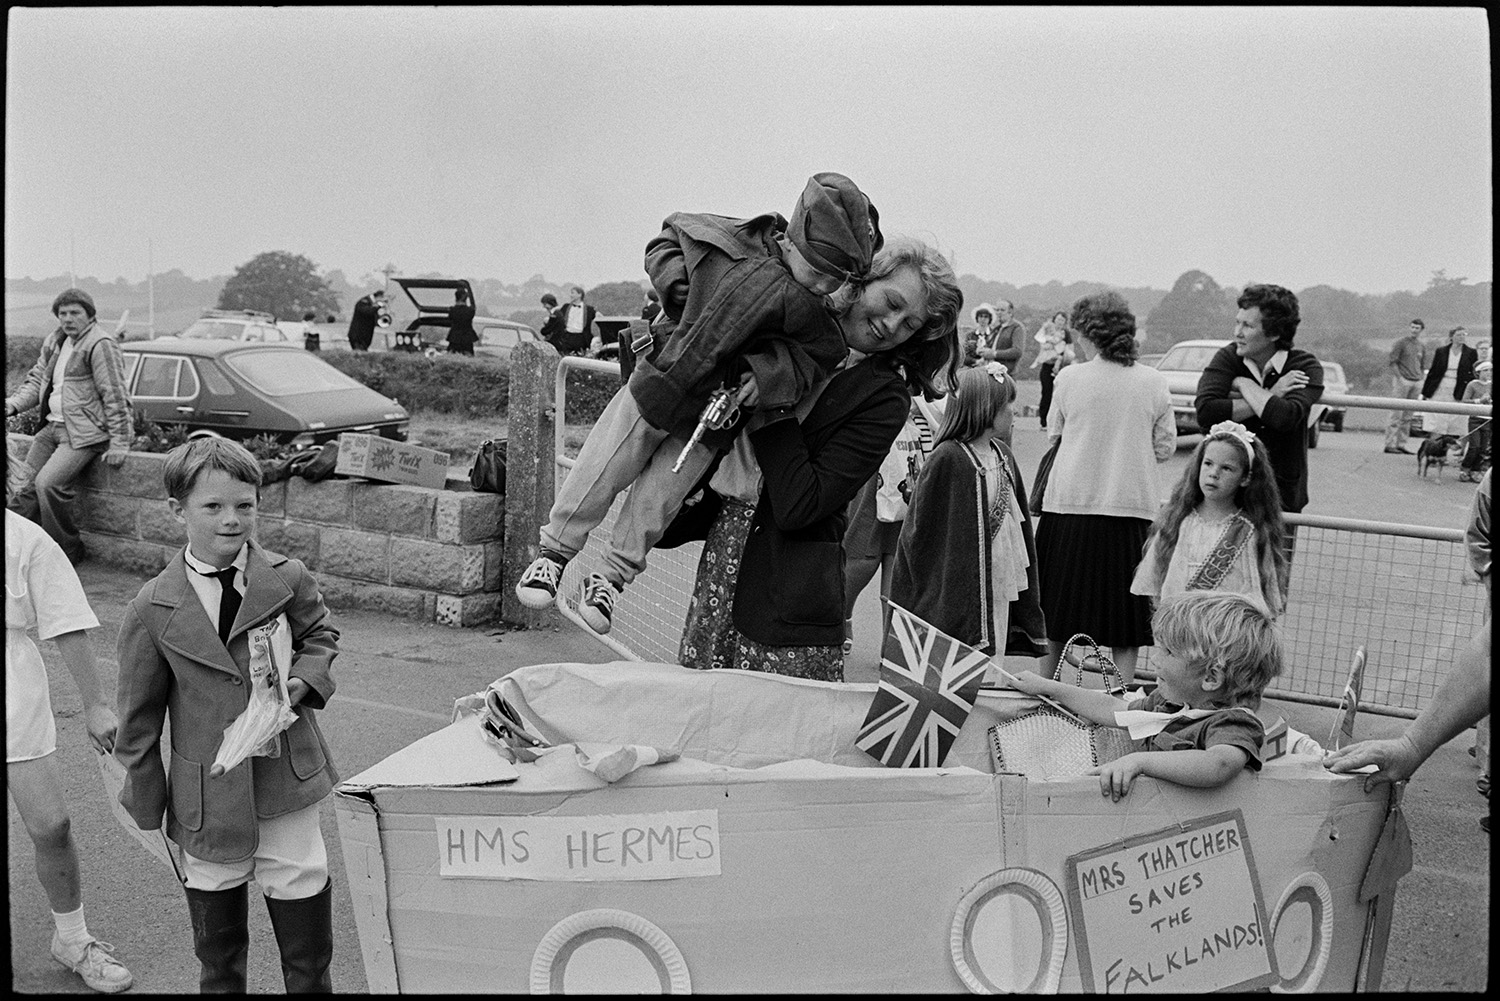 Fancy dress preparations, queen and attendants preparing for parade with brass band. 
[A woman placing a child into a fancy dress entry of a pram made into cardboard boat of HMS Hermes, at Chulmleigh Fair. A sign on the side reads 'Mrs Thatched Saves the Falklands!'. Other people and parked cars can be seen in the background.]